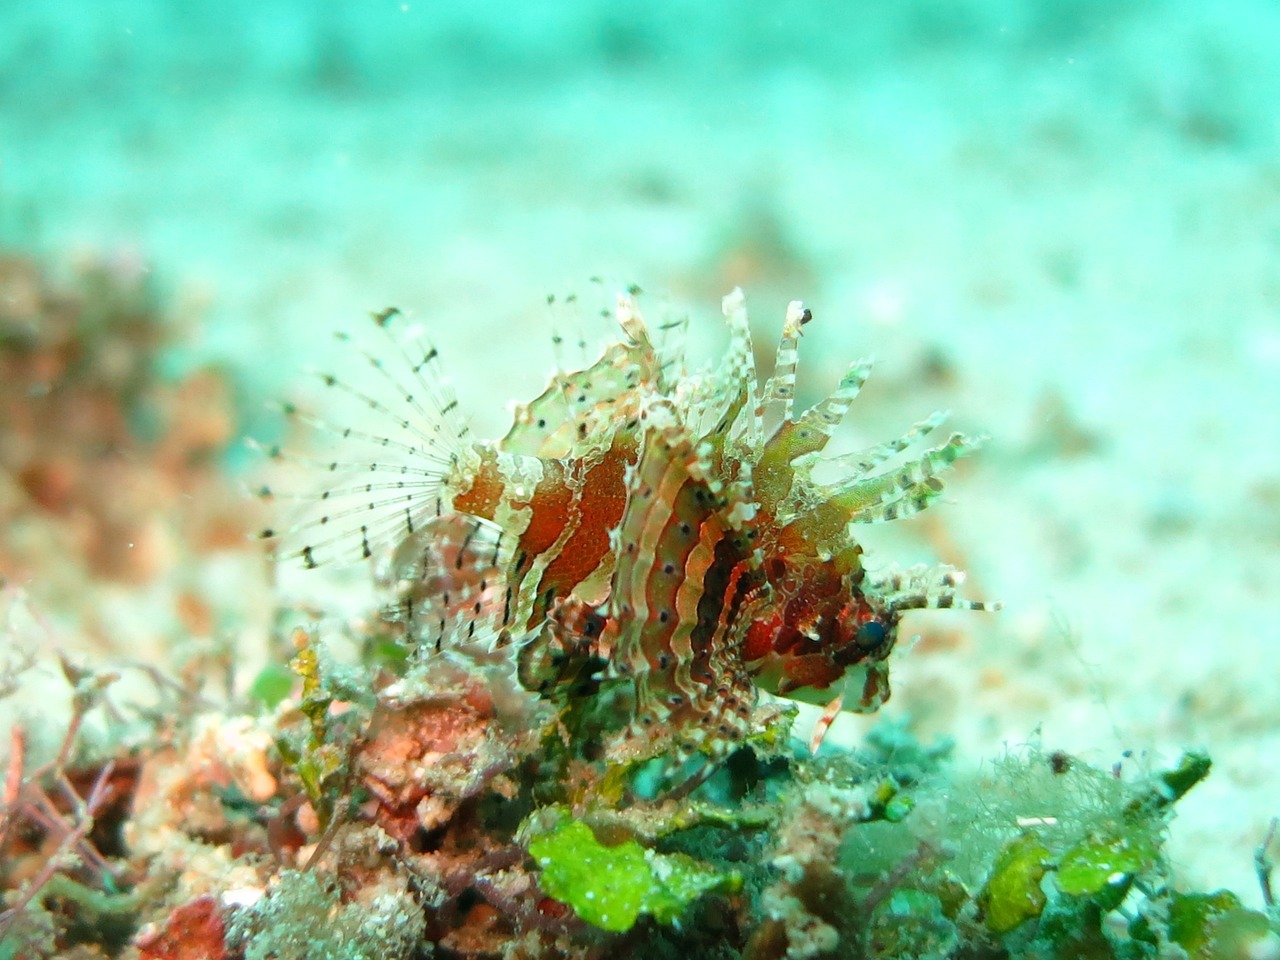 a close up of a fish on a sandy surface, a macro photograph, baroque, mohawk, standing under the sea, red scales on his back, dlsr photo